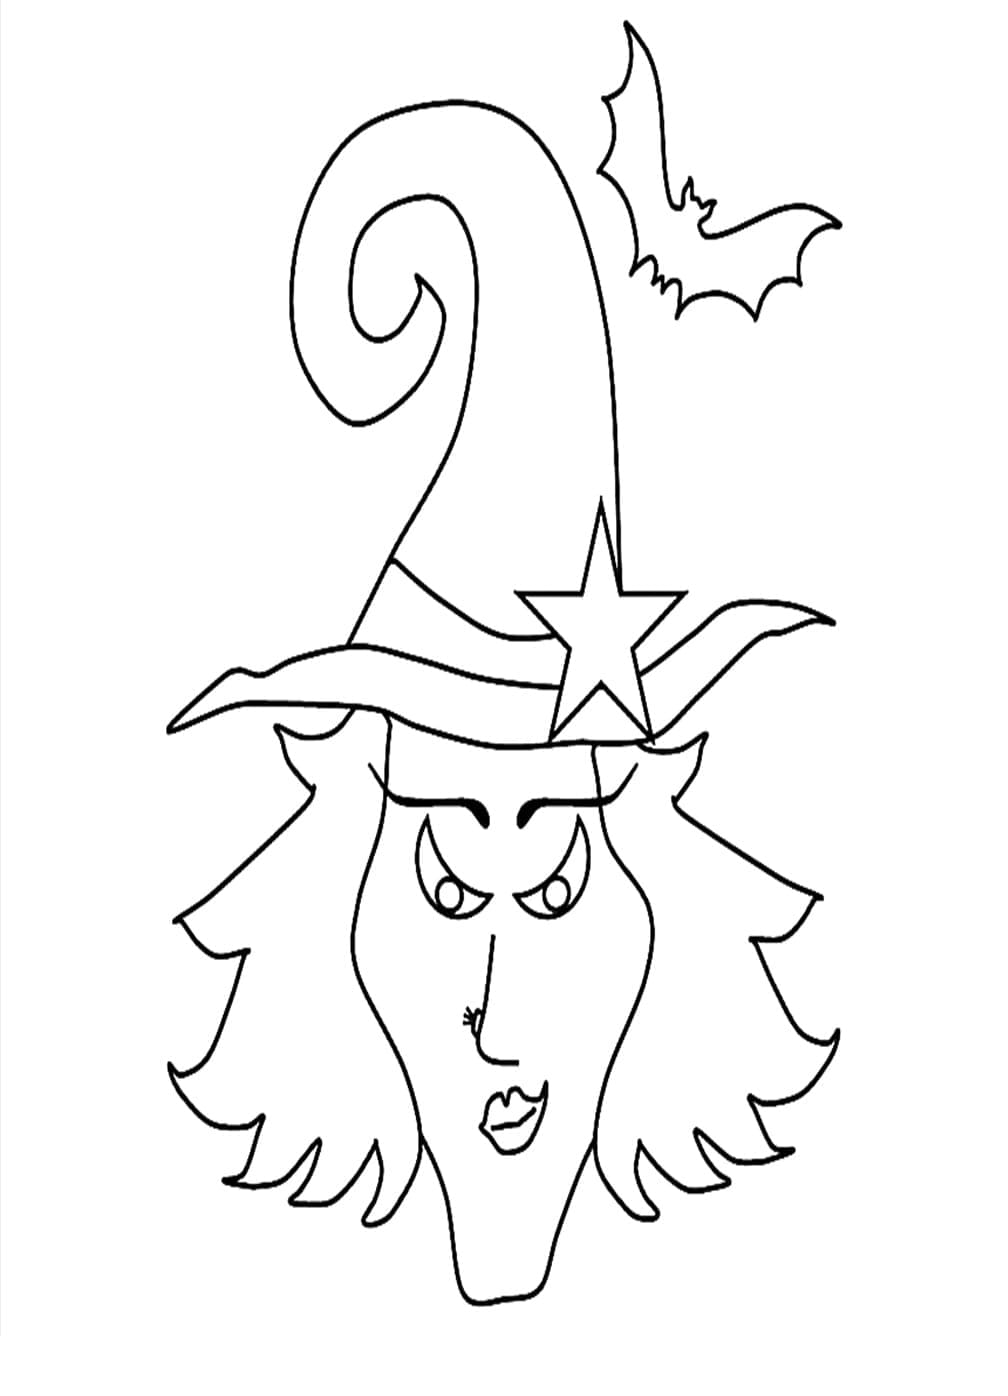 Halloween witch mask coloring page